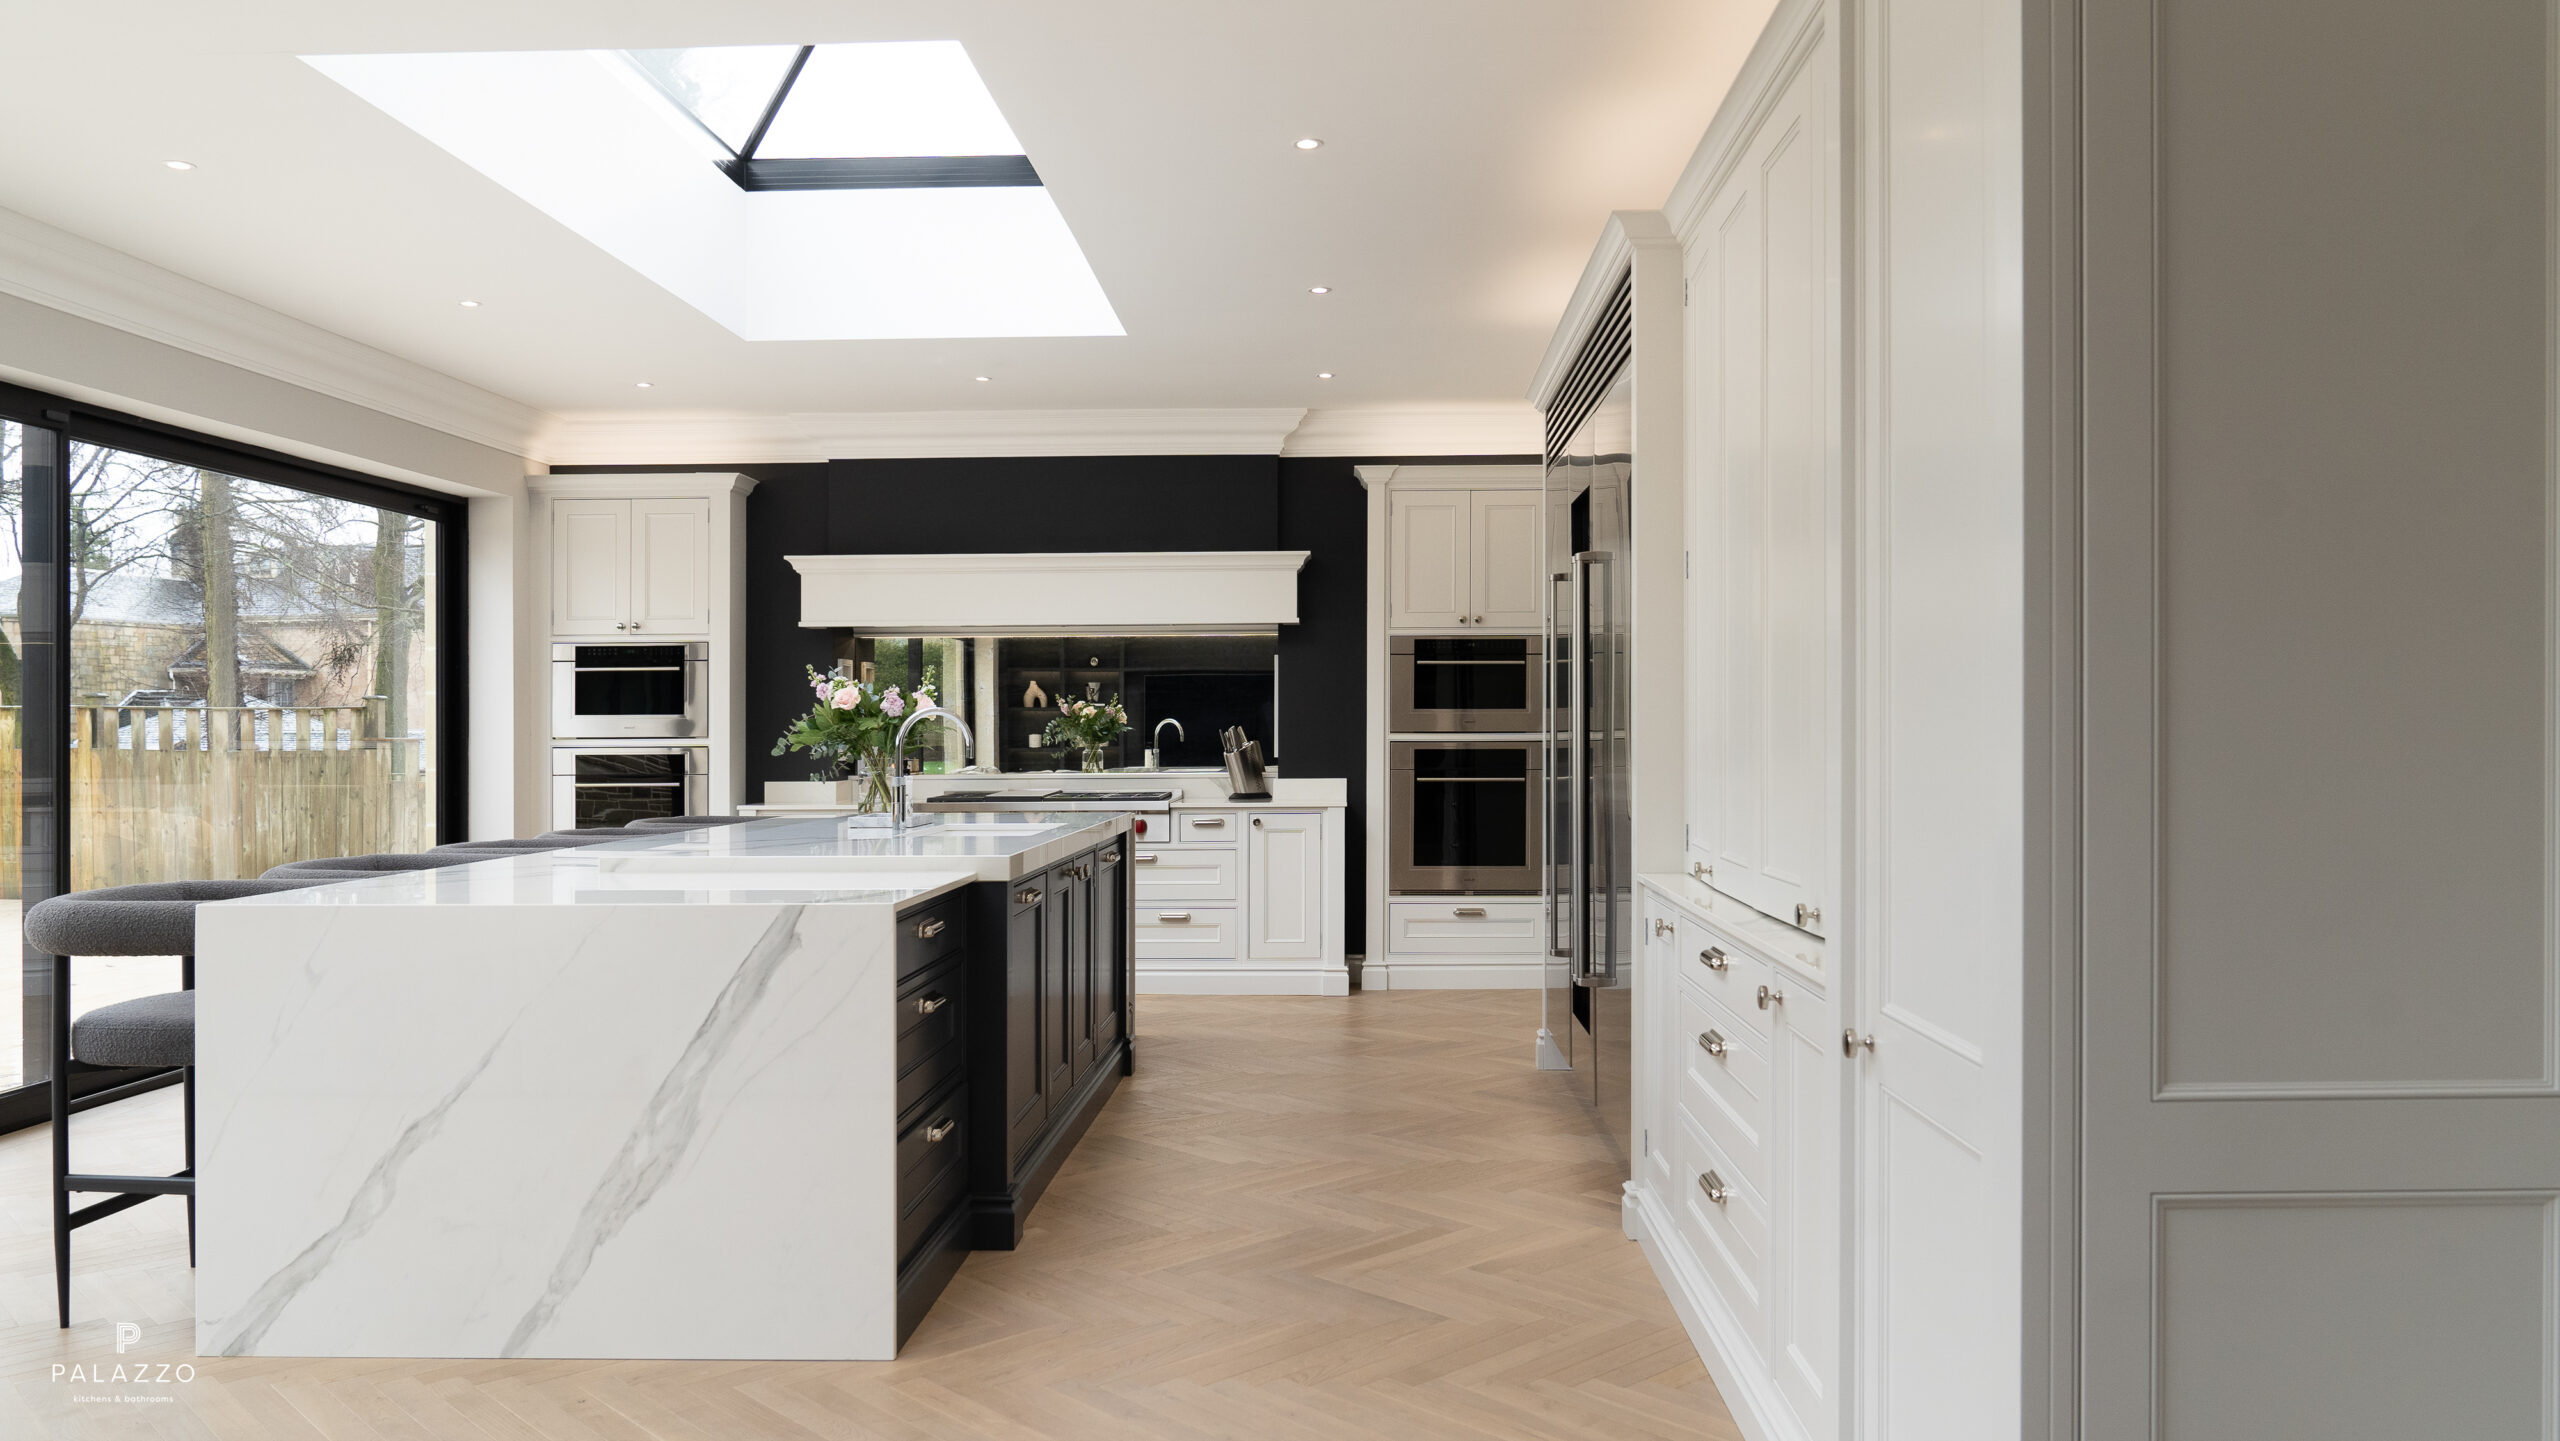 Image 1: An In-Frame Kitchen In A New Home Extension In Glasgow